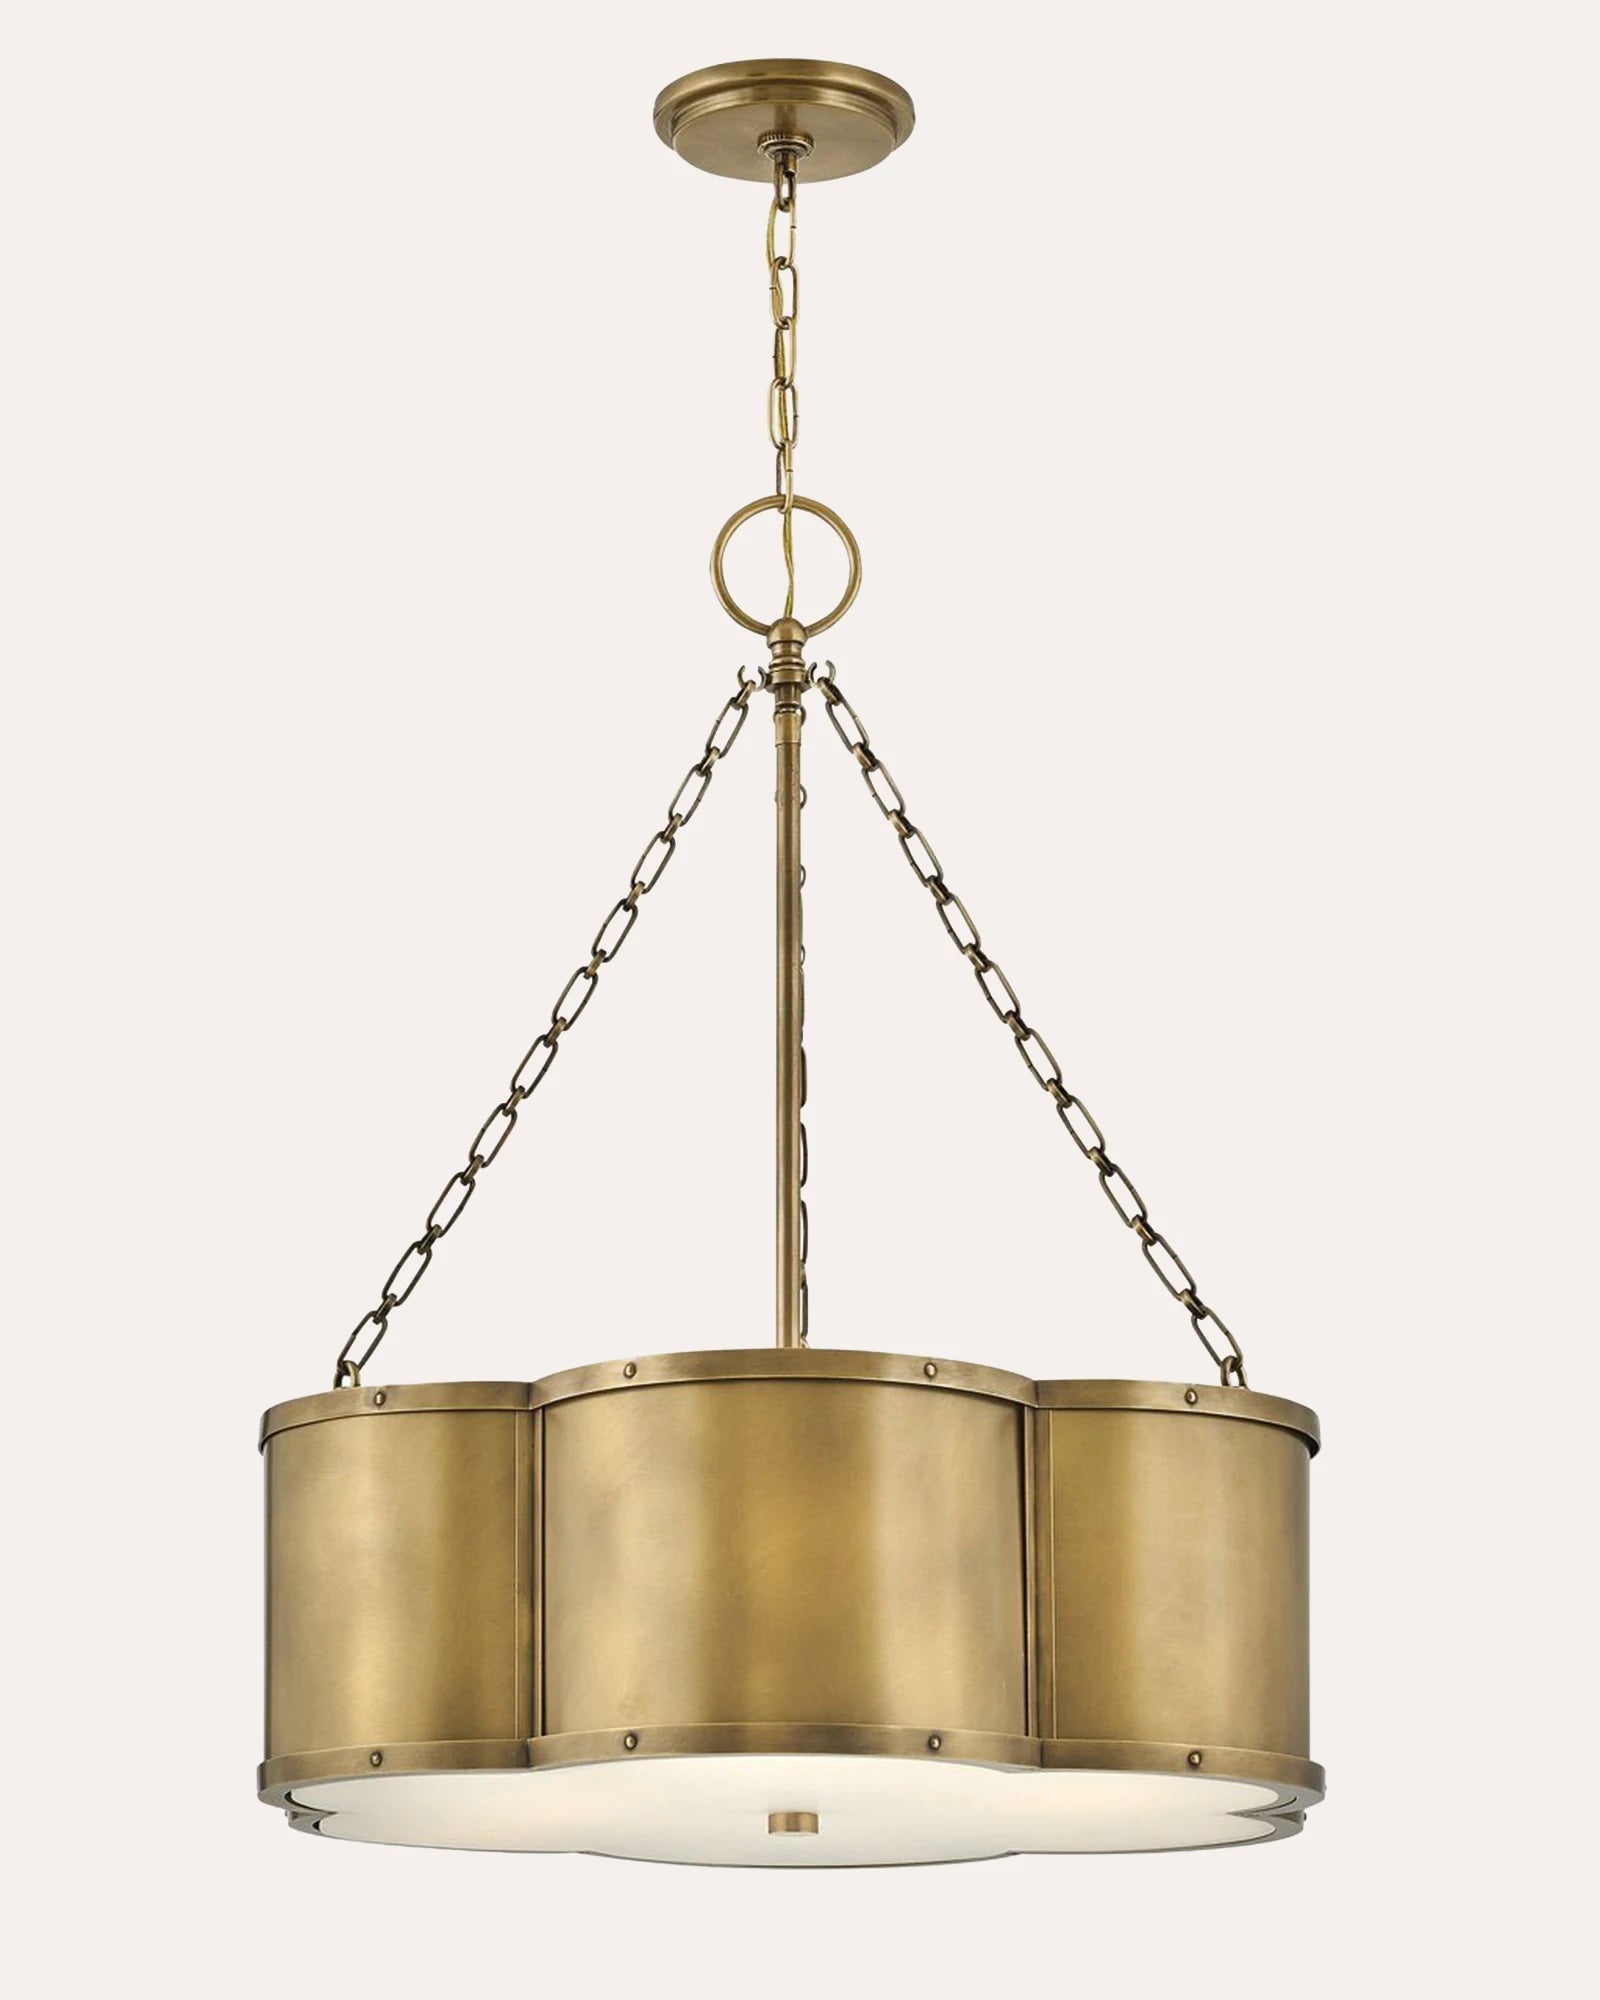 Shop Chance Pendant Light by Hinkley at Nook Collections